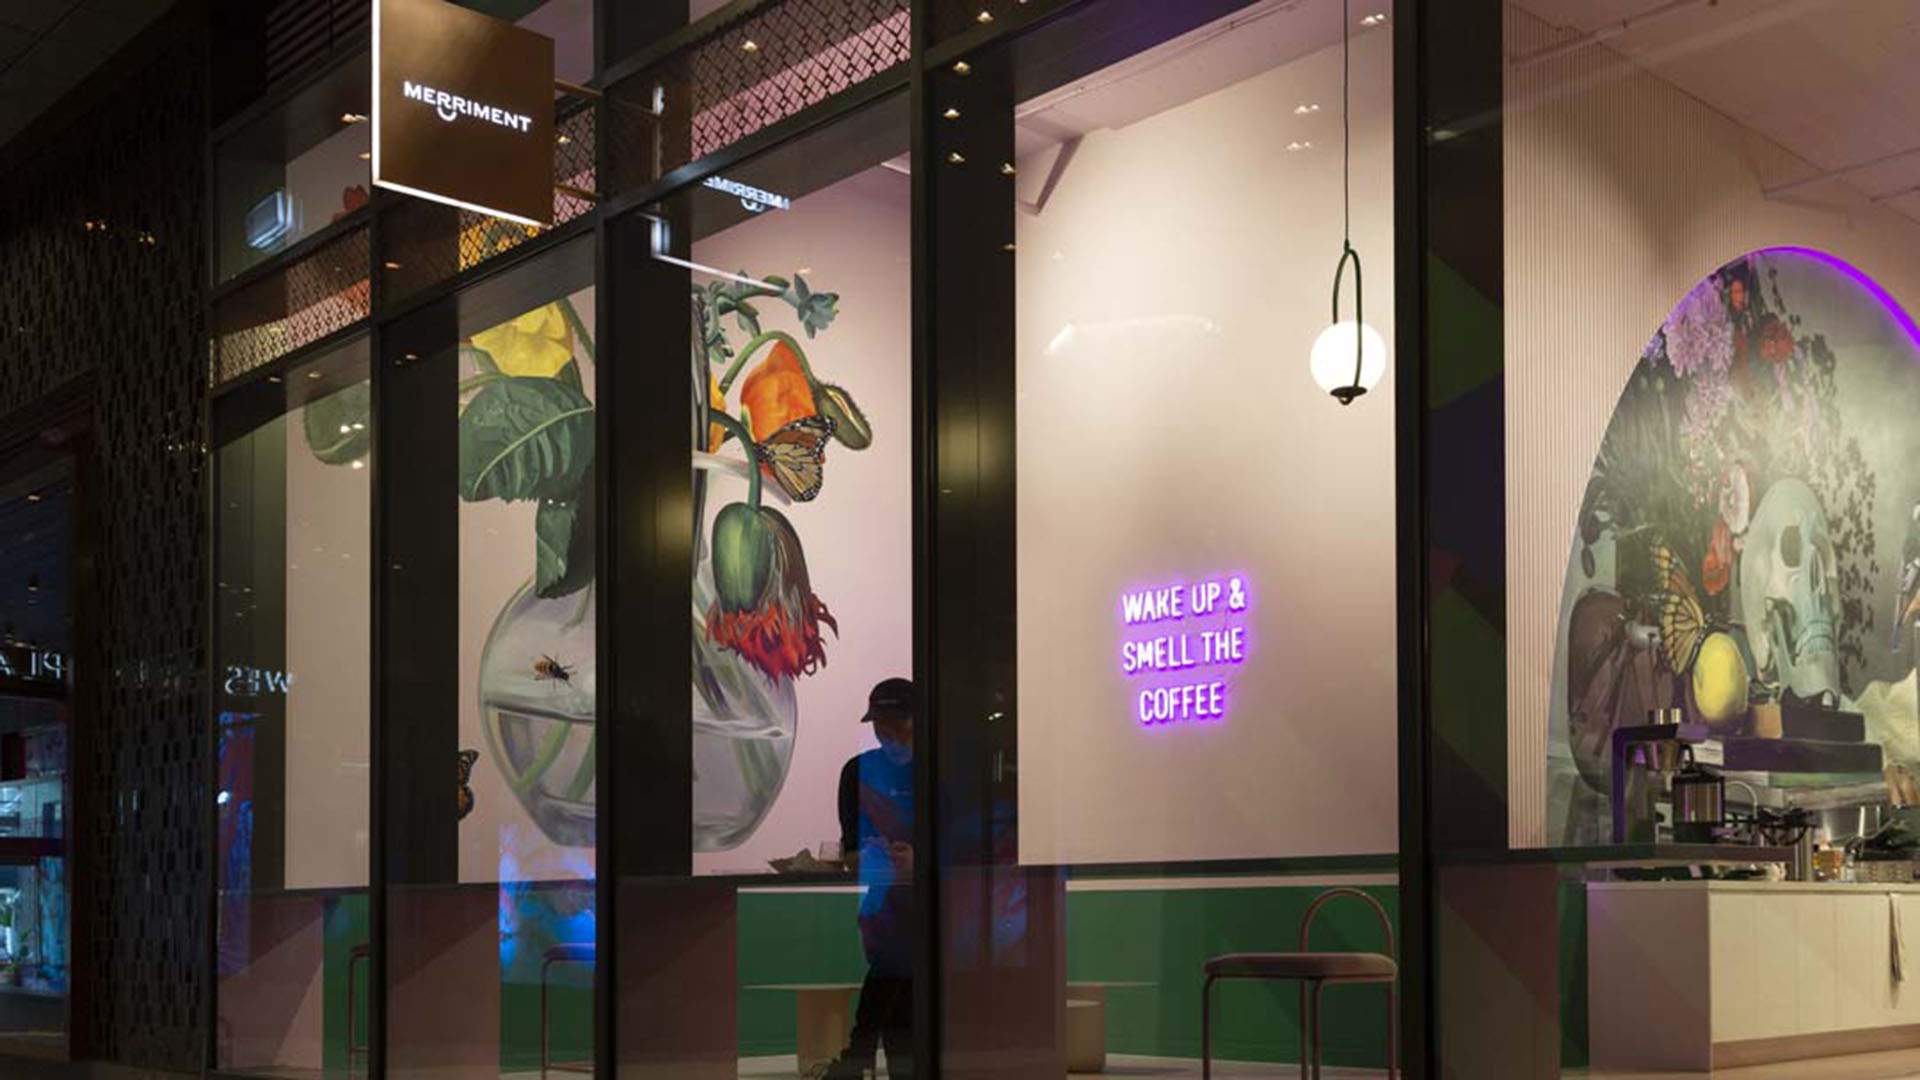 This New Melbourne Retail Arcade Has Been Transformed Into an Immersive Public Gallery